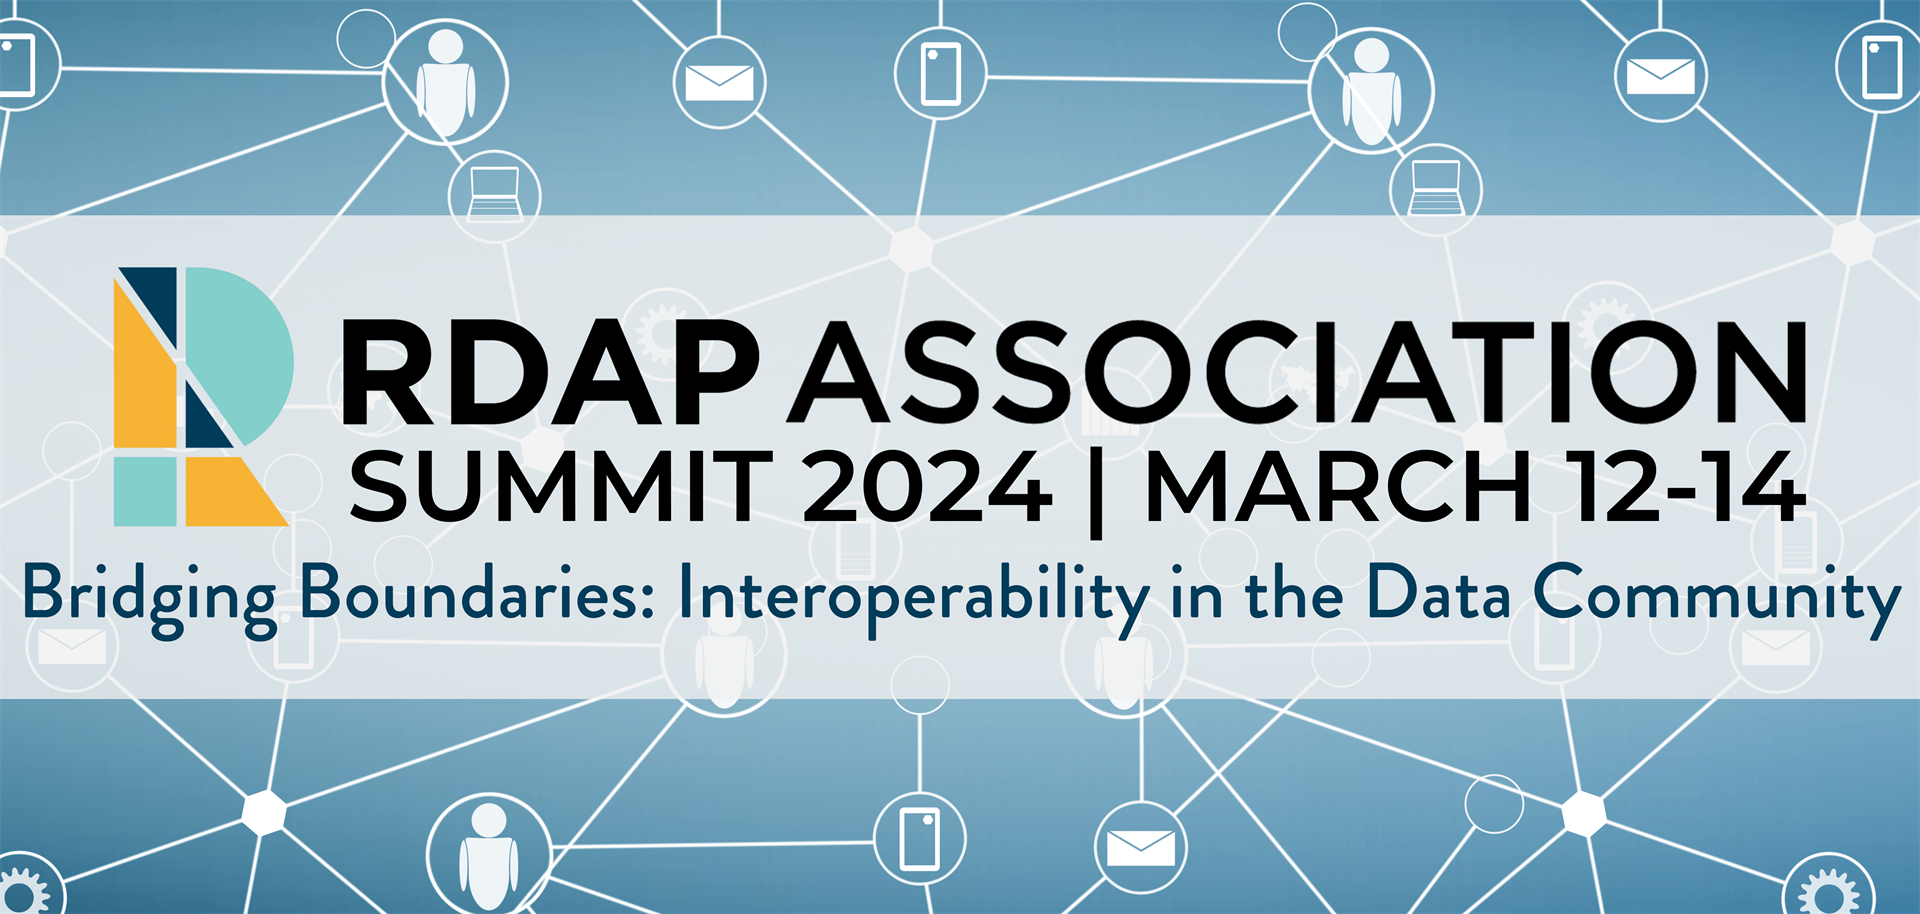 Register for the RDAP Summit 2024